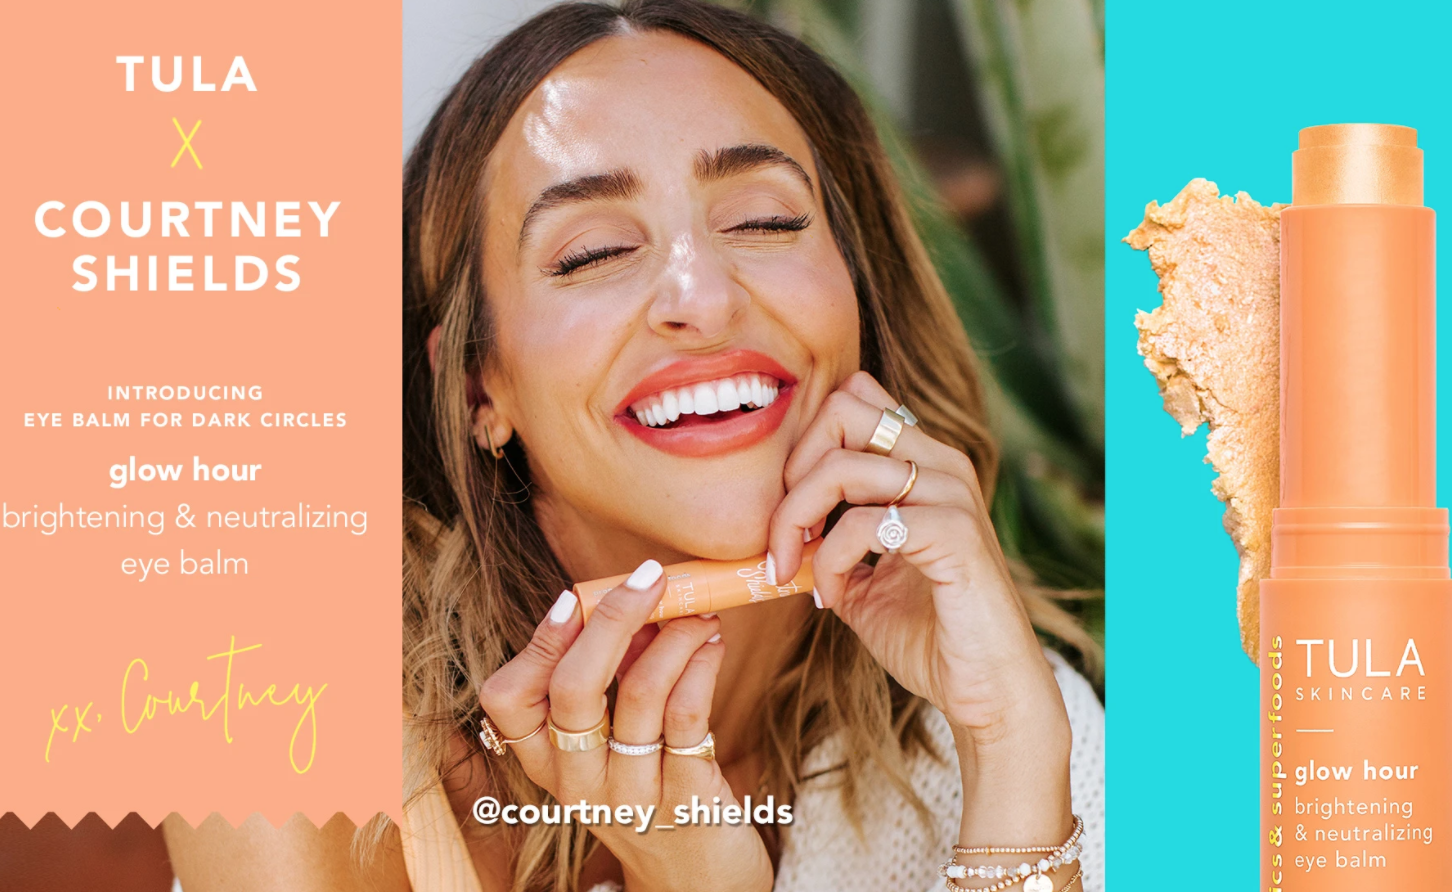 Advertisement for the TULA x Courtney Shields Glow Hour collaboration.